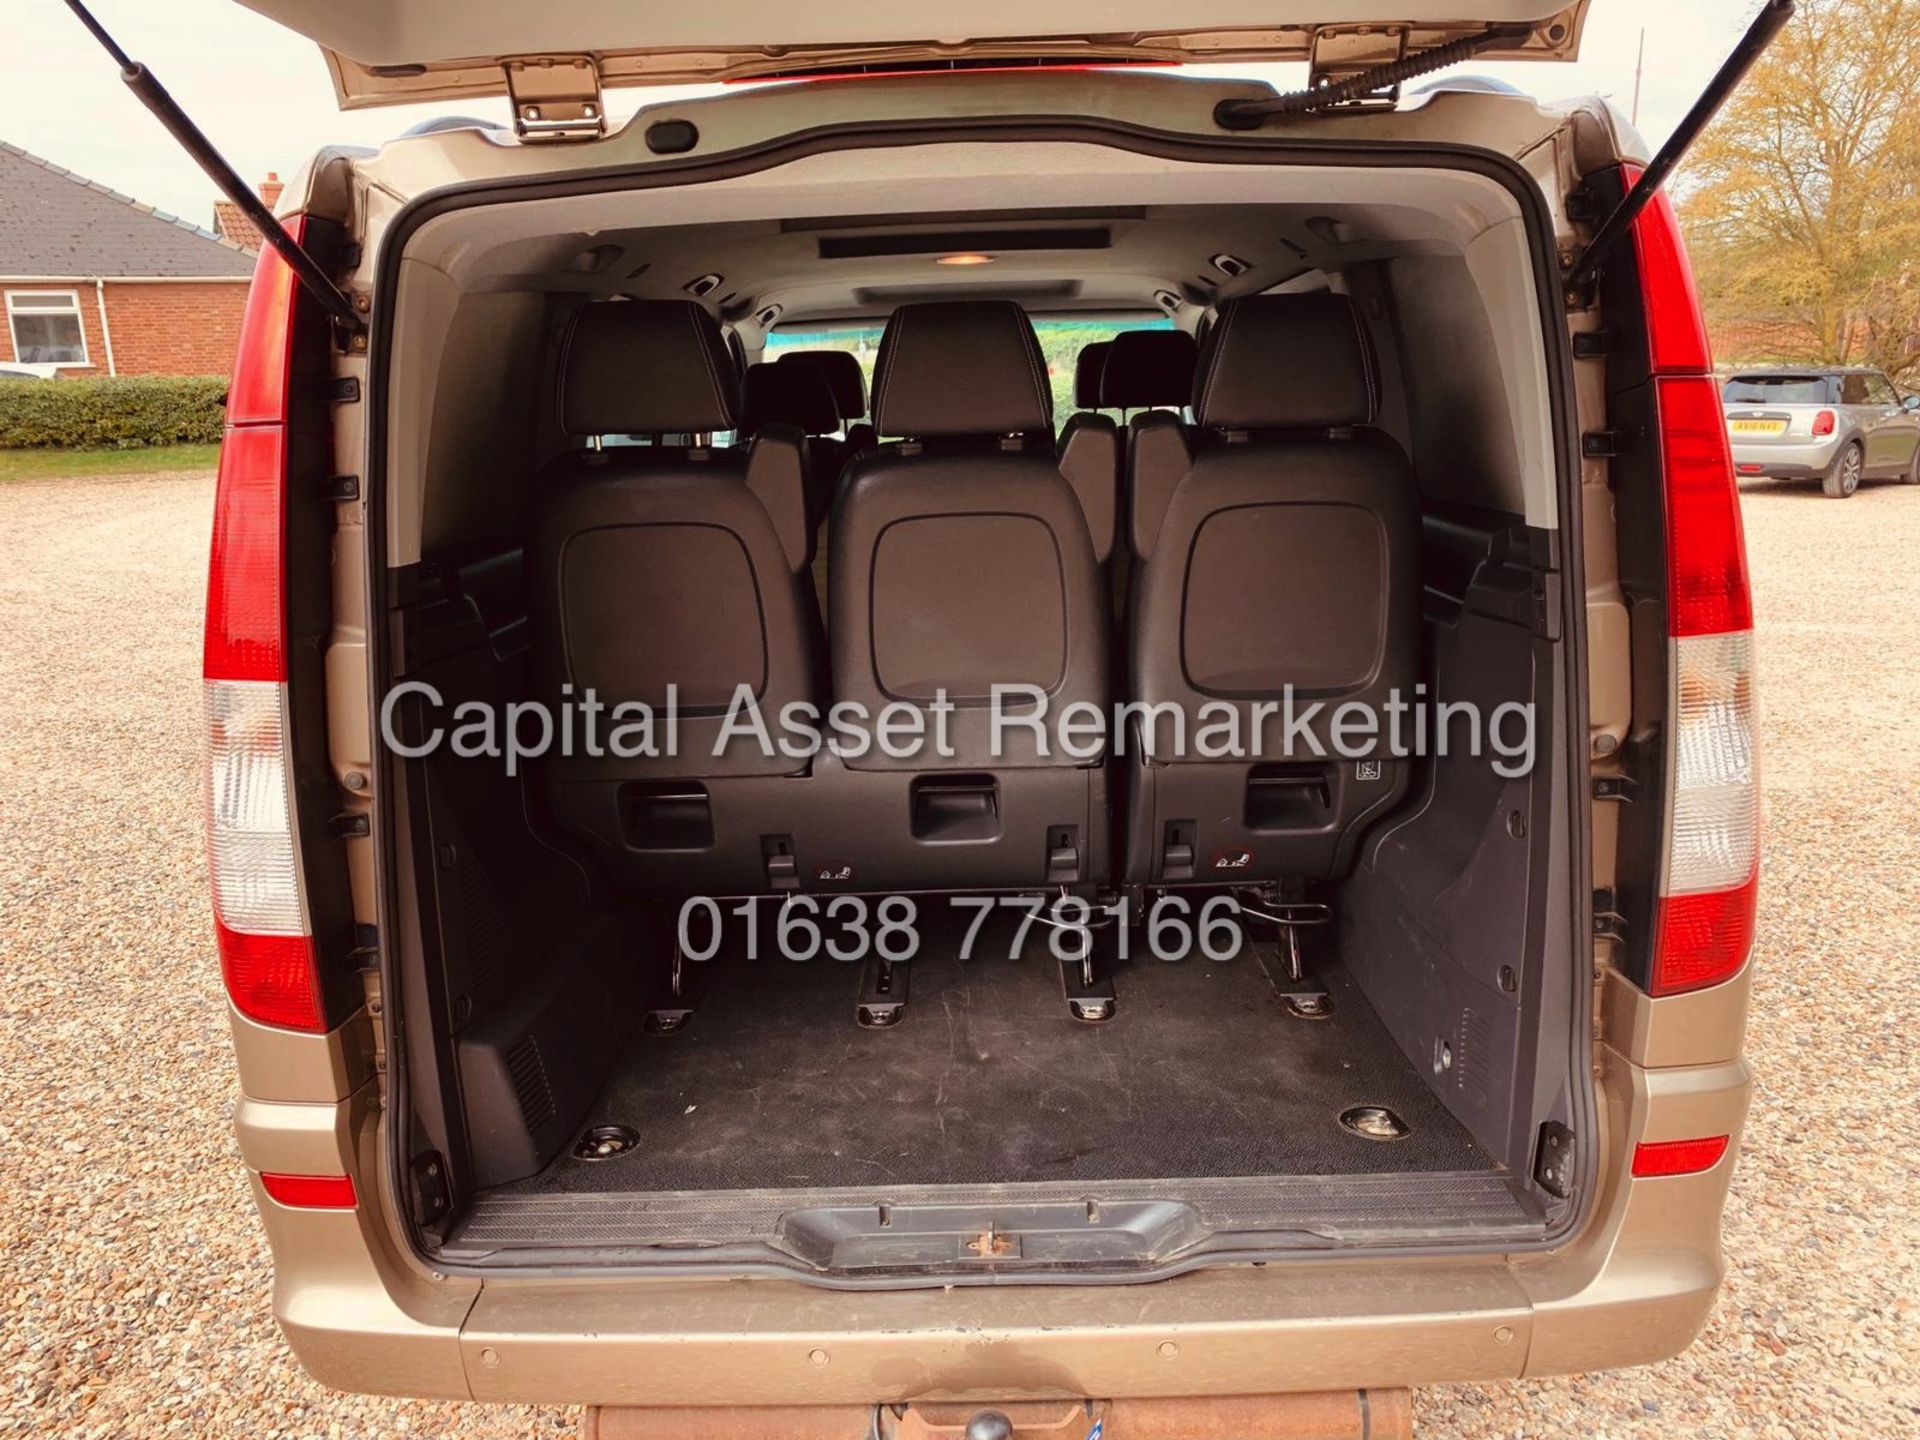 MERCEDES VITO 122CDI *SPORT-X SPEC* 8 SEATER DUALINER LWB (12 REG) 1 OWNER FSH -AIR CON-ALL THE TOYS - Image 18 of 19